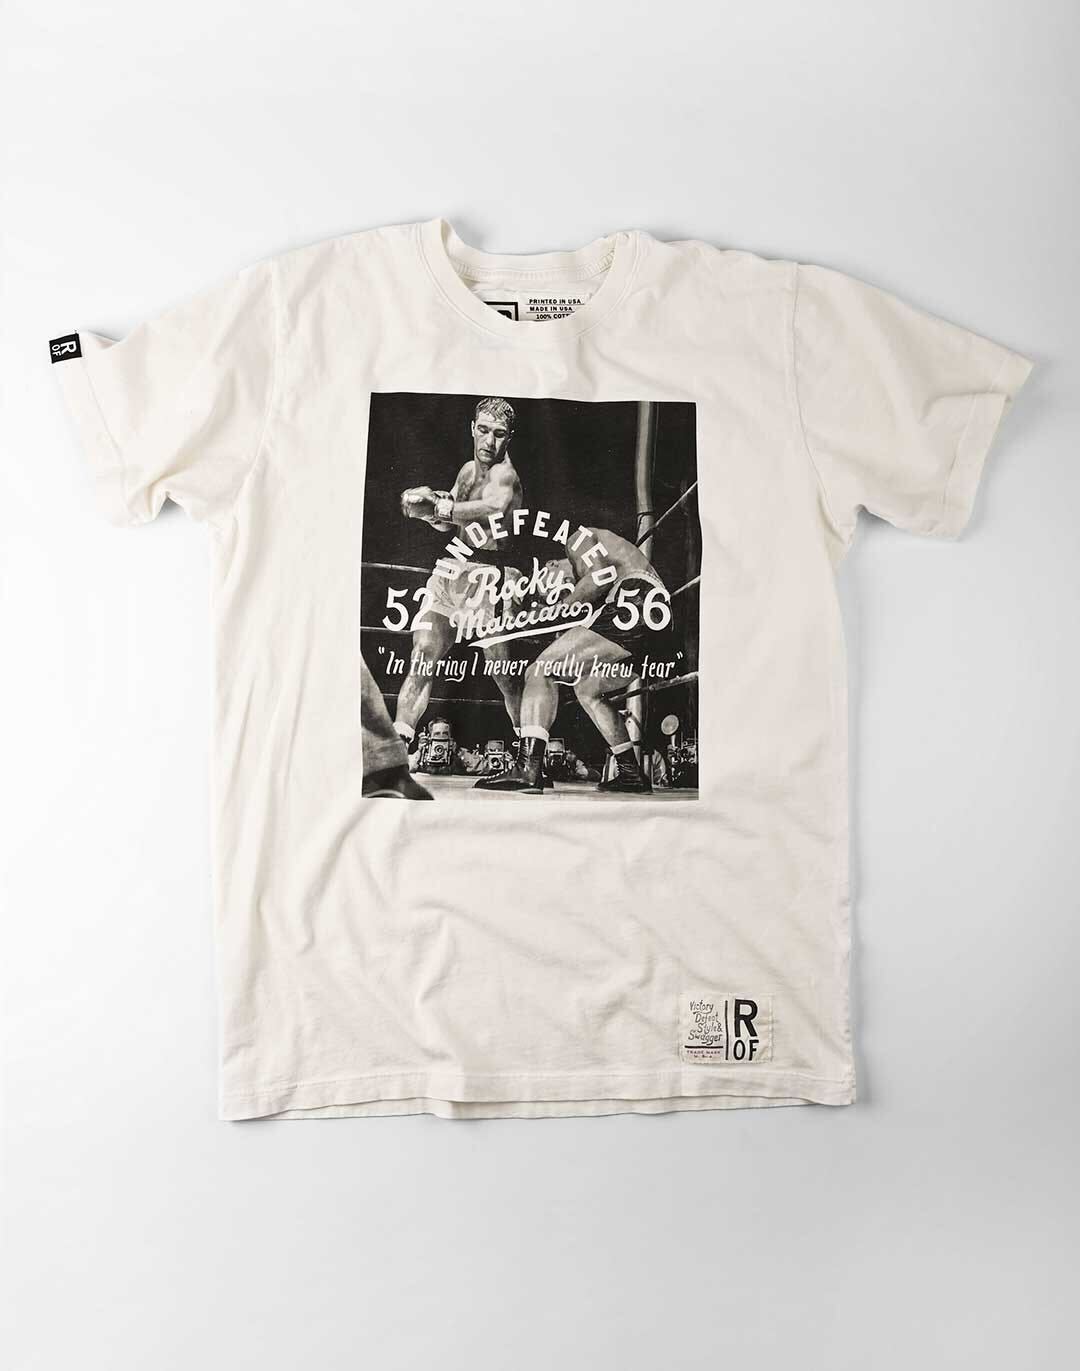 Rocky Marciano Undefeated Photo Tee - Roots of Fight Canada